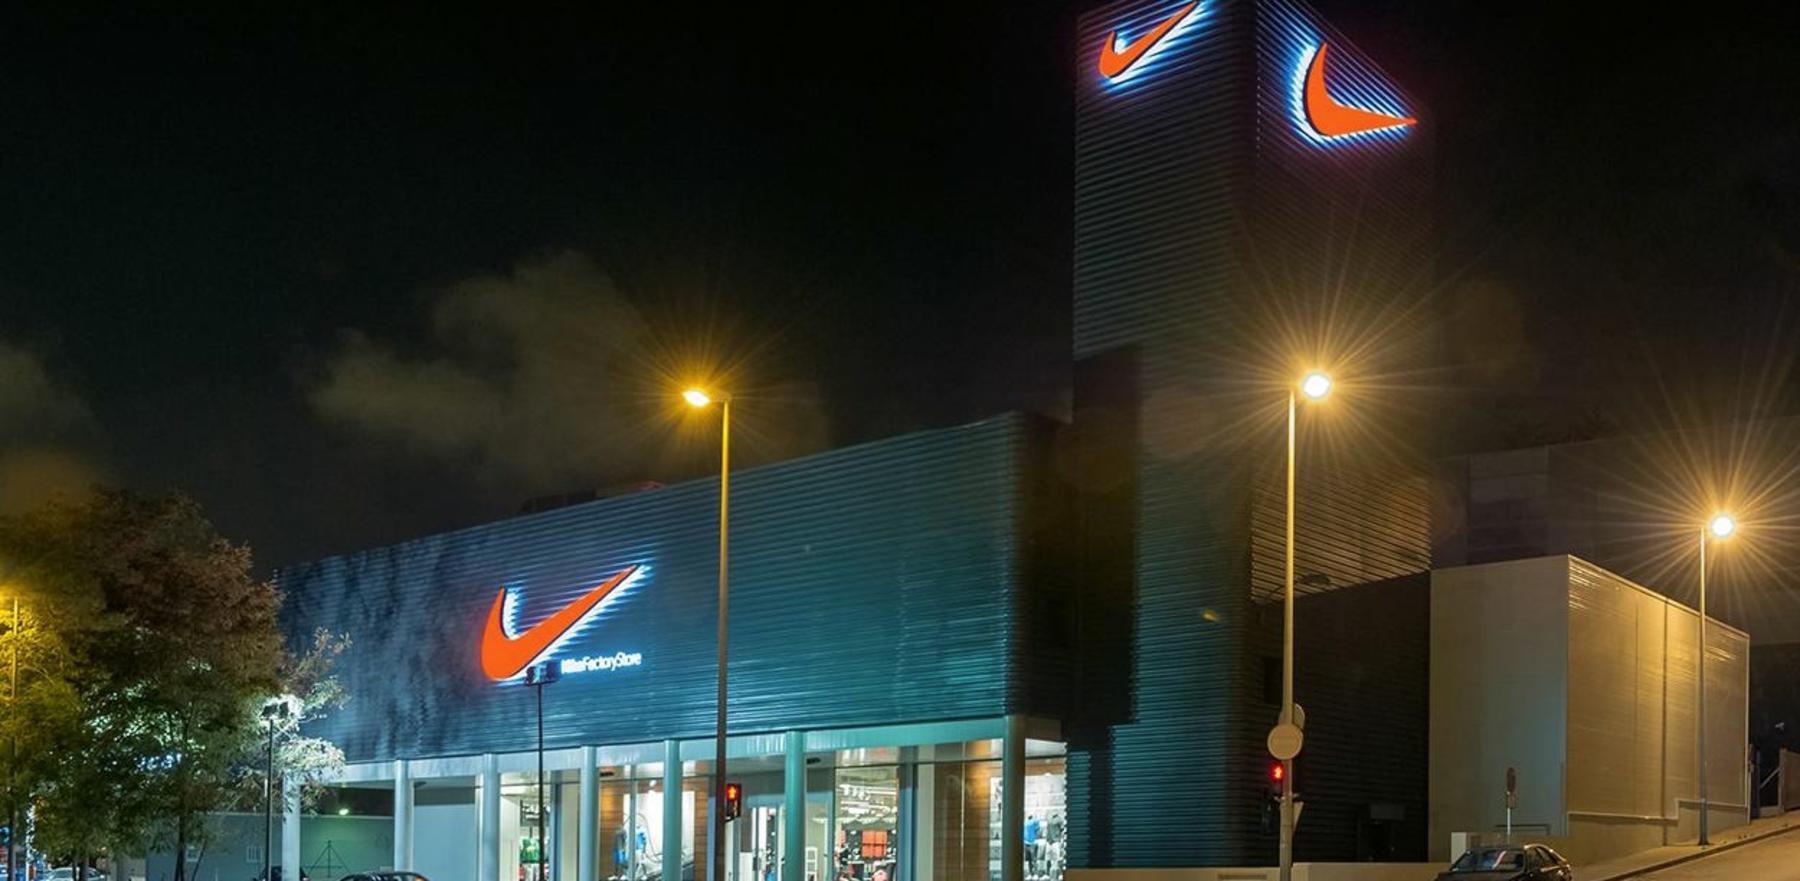 outlet nike montigala